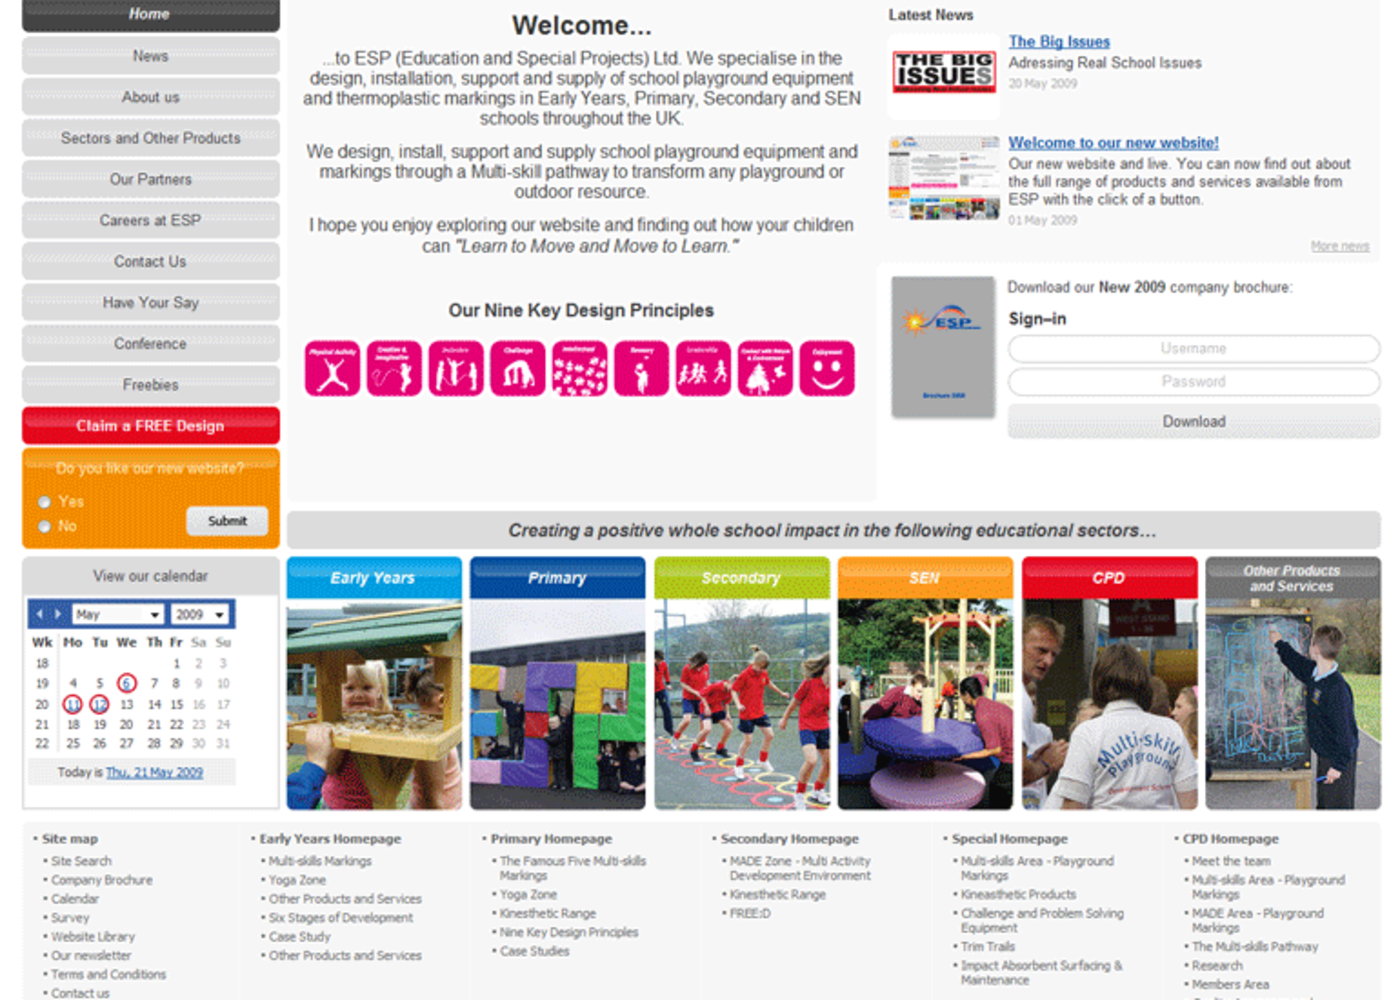 Education and Special Projects Homepage footer